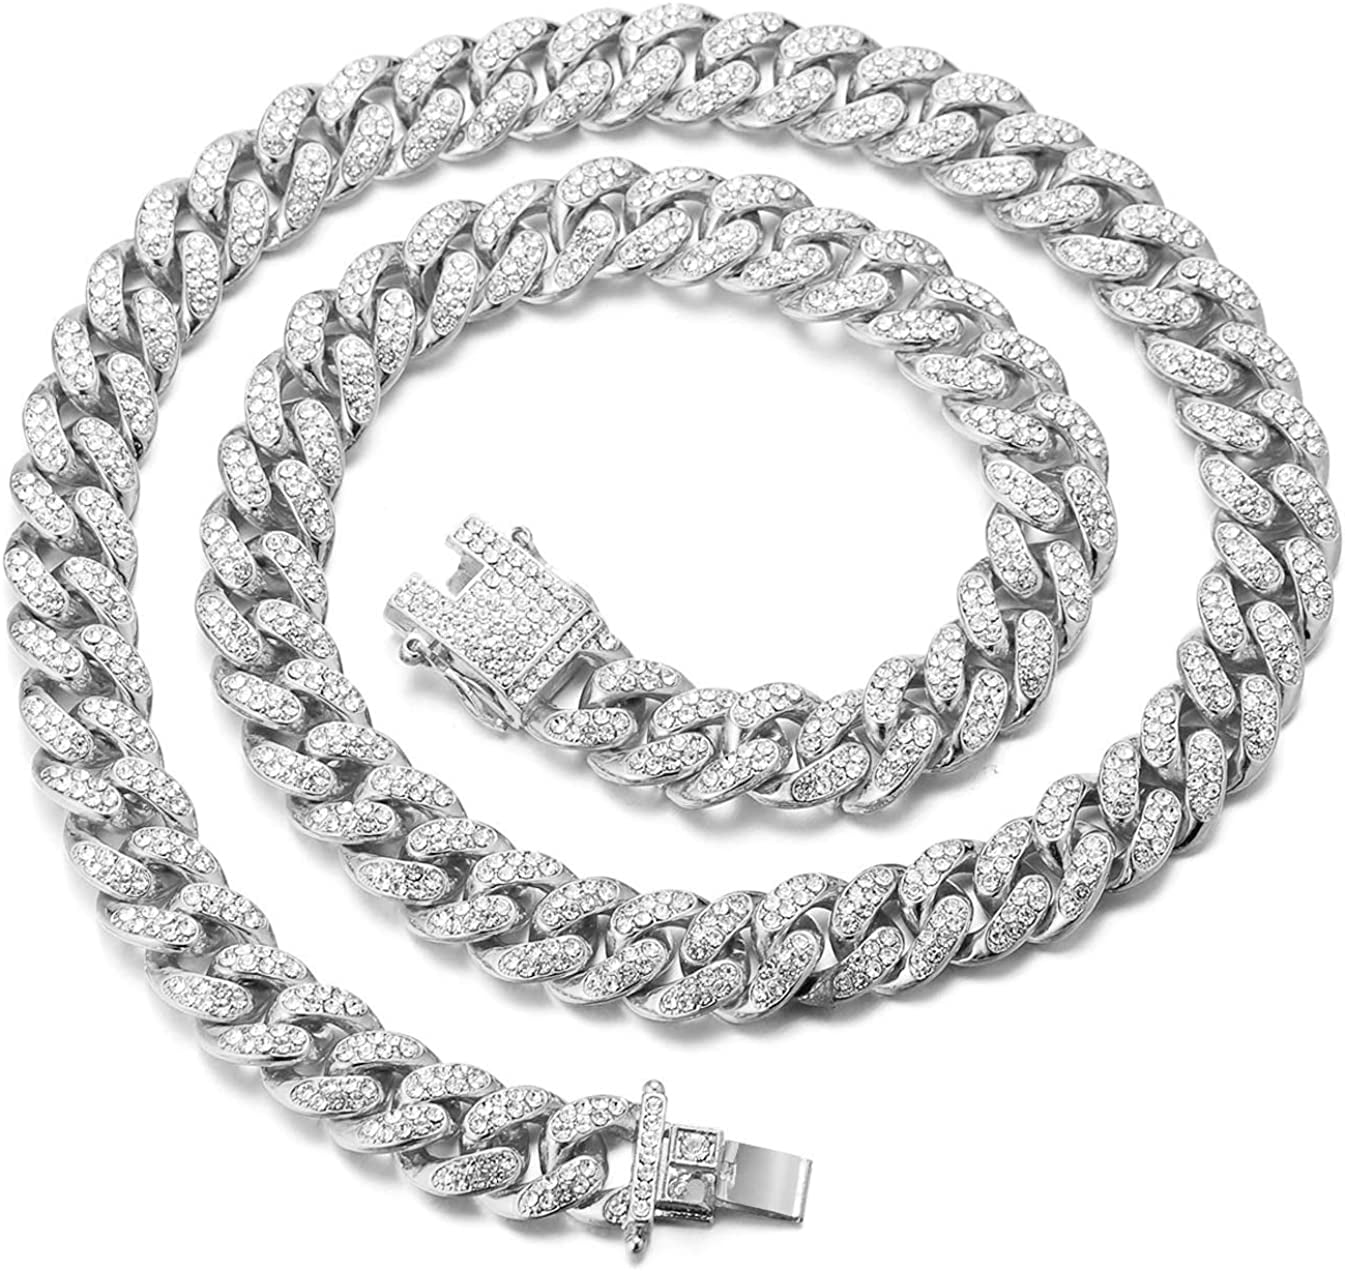 Miami Cuban Link Chain Bracelet Gold And Silver Iced Out Hip Hop Hip Hop  Jewelry For Men 244Z From Igbvb, $16.74 | DHgate.Com